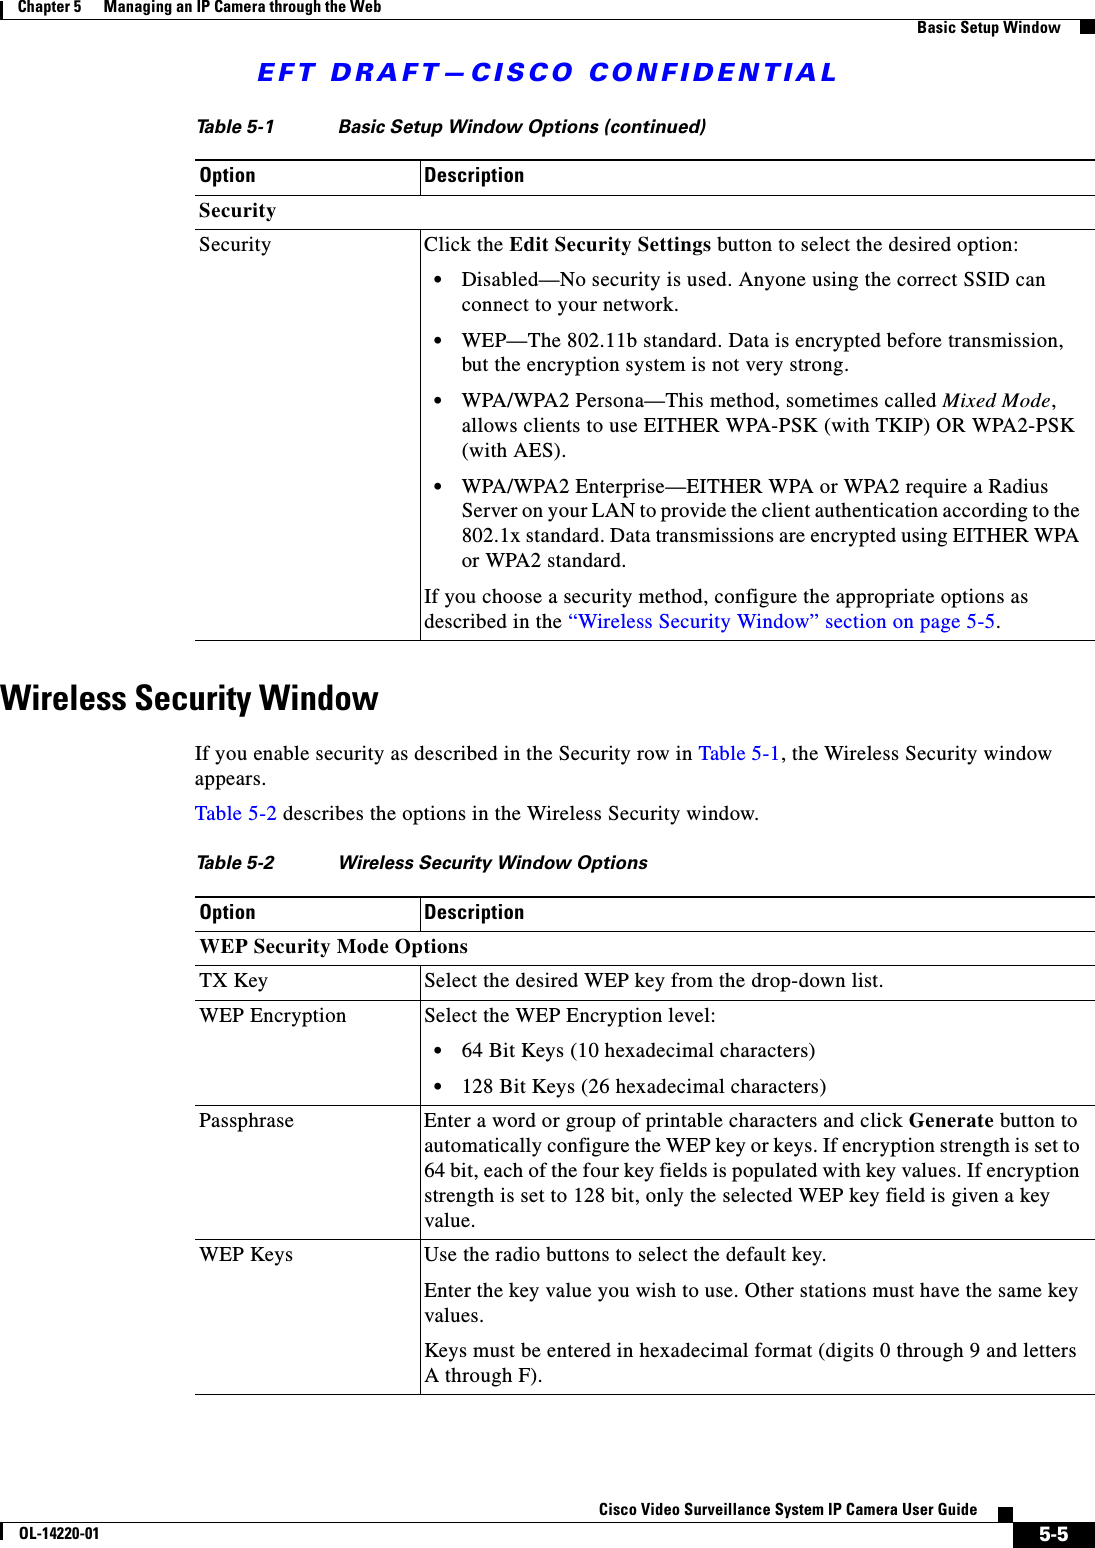 EFT DRAFT—CISCO CONFIDENTIAL5-5Cisco Video Surveillance System IP Camera User GuideOL-14220-01Chapter 5      Managing an IP Camera through the WebBasic Setup WindowWireless Security WindowIf you enable security as described in the Security row in Table 5-1, the Wireless Security window appears. Table 5-2 describes the options in the Wireless Security window.SecuritySecurity Click the Edit Security Settings button to select the desired option:•Disabled—No security is used. Anyone using the correct SSID can connect to your network. •WEP—The 802.11b standard. Data is encrypted before transmission, but the encryption system is not very strong. •WPA/WPA2 Persona—This method, sometimes called Mixed Mode, allows clients to use EITHER WPA-PSK (with TKIP) OR WPA2-PSK (with AES).•WPA/WPA2 Enterprise—EITHER WPA or WPA2 require a Radius Server on your LAN to provide the client authentication according to the 802.1x standard. Data transmissions are encrypted using EITHER WPA or WPA2 standard.If you choose a security method, configure the appropriate options as described in the “Wireless Security Window” section on page 5-5.Table 5-1 Basic Setup Window Options (continued)Option DescriptionTable 5-2 Wireless Security Window OptionsOption DescriptionWEP Security Mode OptionsTX Key Select the desired WEP key from the drop-down list. WEP Encryption Select the WEP Encryption level: •64 Bit Keys (10 hexadecimal characters)•128 Bit Keys (26 hexadecimal characters)Passphrase Enter a word or group of printable characters and click Generate button to automatically configure the WEP key or keys. If encryption strength is set to 64 bit, each of the four key fields is populated with key values. If encryption strength is set to 128 bit, only the selected WEP key field is given a key value.WEP Keys Use the radio buttons to select the default key. Enter the key value you wish to use. Other stations must have the same key values. Keys must be entered in hexadecimal format (digits 0 through 9 and letters A through F).